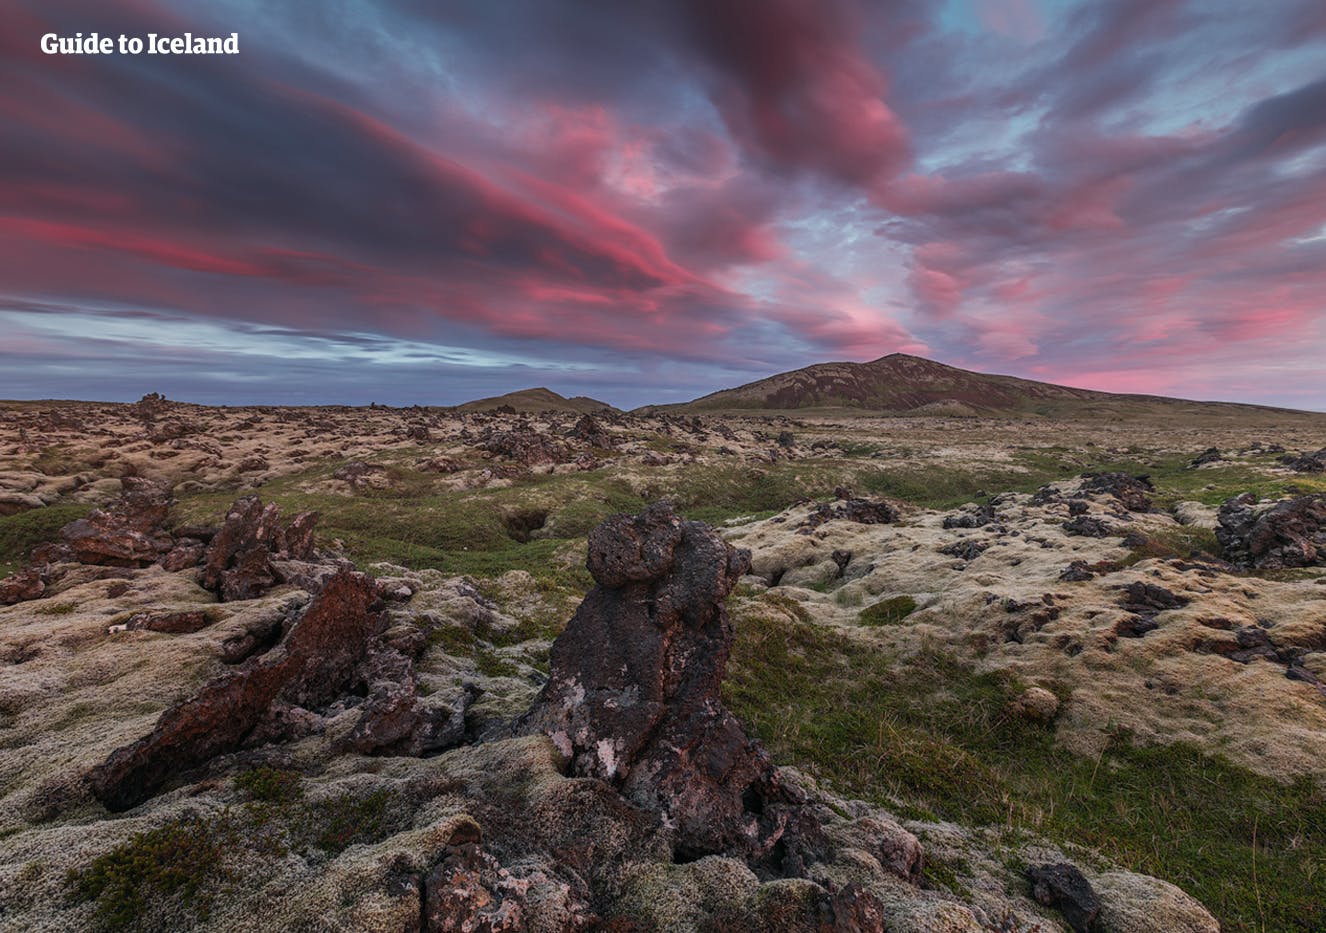 A lava field in the West of Iceland.